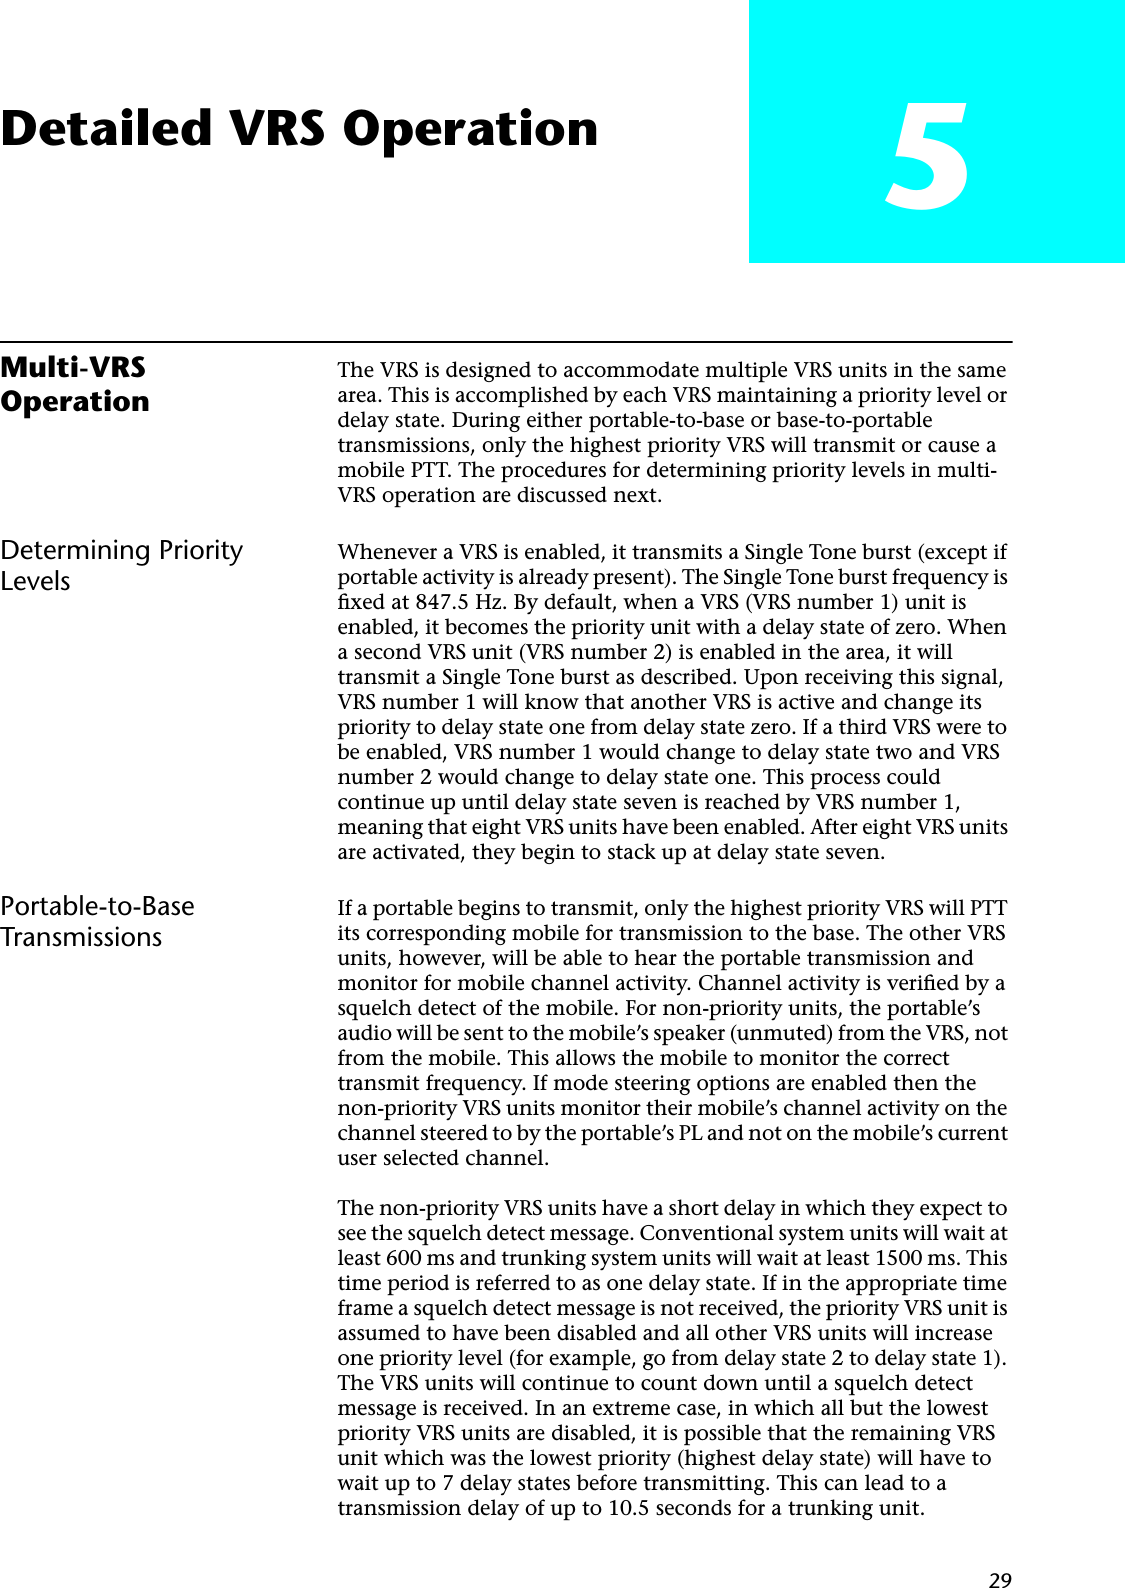 29Detailed VRS Operation 5Multi-VRS OperationThe VRS is designed to accommodate multiple VRS units in the same area. This is accomplished by each VRS maintaining a priority level or delay state. During either portable-to-base or base-to-portable transmissions, only the highest priority VRS will transmit or cause a mobile PTT. The procedures for determining priority levels in multi-VRS operation are discussed next.Determining Priority LevelsWhenever a VRS is enabled, it transmits a Single Tone burst (except if portable activity is already present). The Single Tone burst frequency is ﬁxed at 847.5 Hz. By default, when a VRS (VRS number 1) unit is enabled, it becomes the priority unit with a delay state of zero. When a second VRS unit (VRS number 2) is enabled in the area, it will transmit a Single Tone burst as described. Upon receiving this signal, VRS number 1 will know that another VRS is active and change its priority to delay state one from delay state zero. If a third VRS were to be enabled, VRS number 1 would change to delay state two and VRS number 2 would change to delay state one. This process could continue up until delay state seven is reached by VRS number 1, meaning that eight VRS units have been enabled. After eight VRS units are activated, they begin to stack up at delay state seven.Portable-to-Base TransmissionsIf a portable begins to transmit, only the highest priority VRS will PTT its corresponding mobile for transmission to the base. The other VRS units, however, will be able to hear the portable transmission and monitor for mobile channel activity. Channel activity is veriﬁed by a squelch detect of the mobile. For non-priority units, the portable’s audio will be sent to the mobile’s speaker (unmuted) from the VRS, not from the mobile. This allows the mobile to monitor the correct transmit frequency. If mode steering options are enabled then the non-priority VRS units monitor their mobile’s channel activity on the channel steered to by the portable’s PL and not on the mobile’s current user selected channel.The non-priority VRS units have a short delay in which they expect to see the squelch detect message. Conventional system units will wait at least 600 ms and trunking system units will wait at least 1500 ms. This time period is referred to as one delay state. If in the appropriate time frame a squelch detect message is not received, the priority VRS unit is assumed to have been disabled and all other VRS units will increase one priority level (for example, go from delay state 2 to delay state 1). The VRS units will continue to count down until a squelch detect message is received. In an extreme case, in which all but the lowest priority VRS units are disabled, it is possible that the remaining VRS unit which was the lowest priority (highest delay state) will have to wait up to 7 delay states before transmitting. This can lead to a transmission delay of up to 10.5 seconds for a trunking unit.